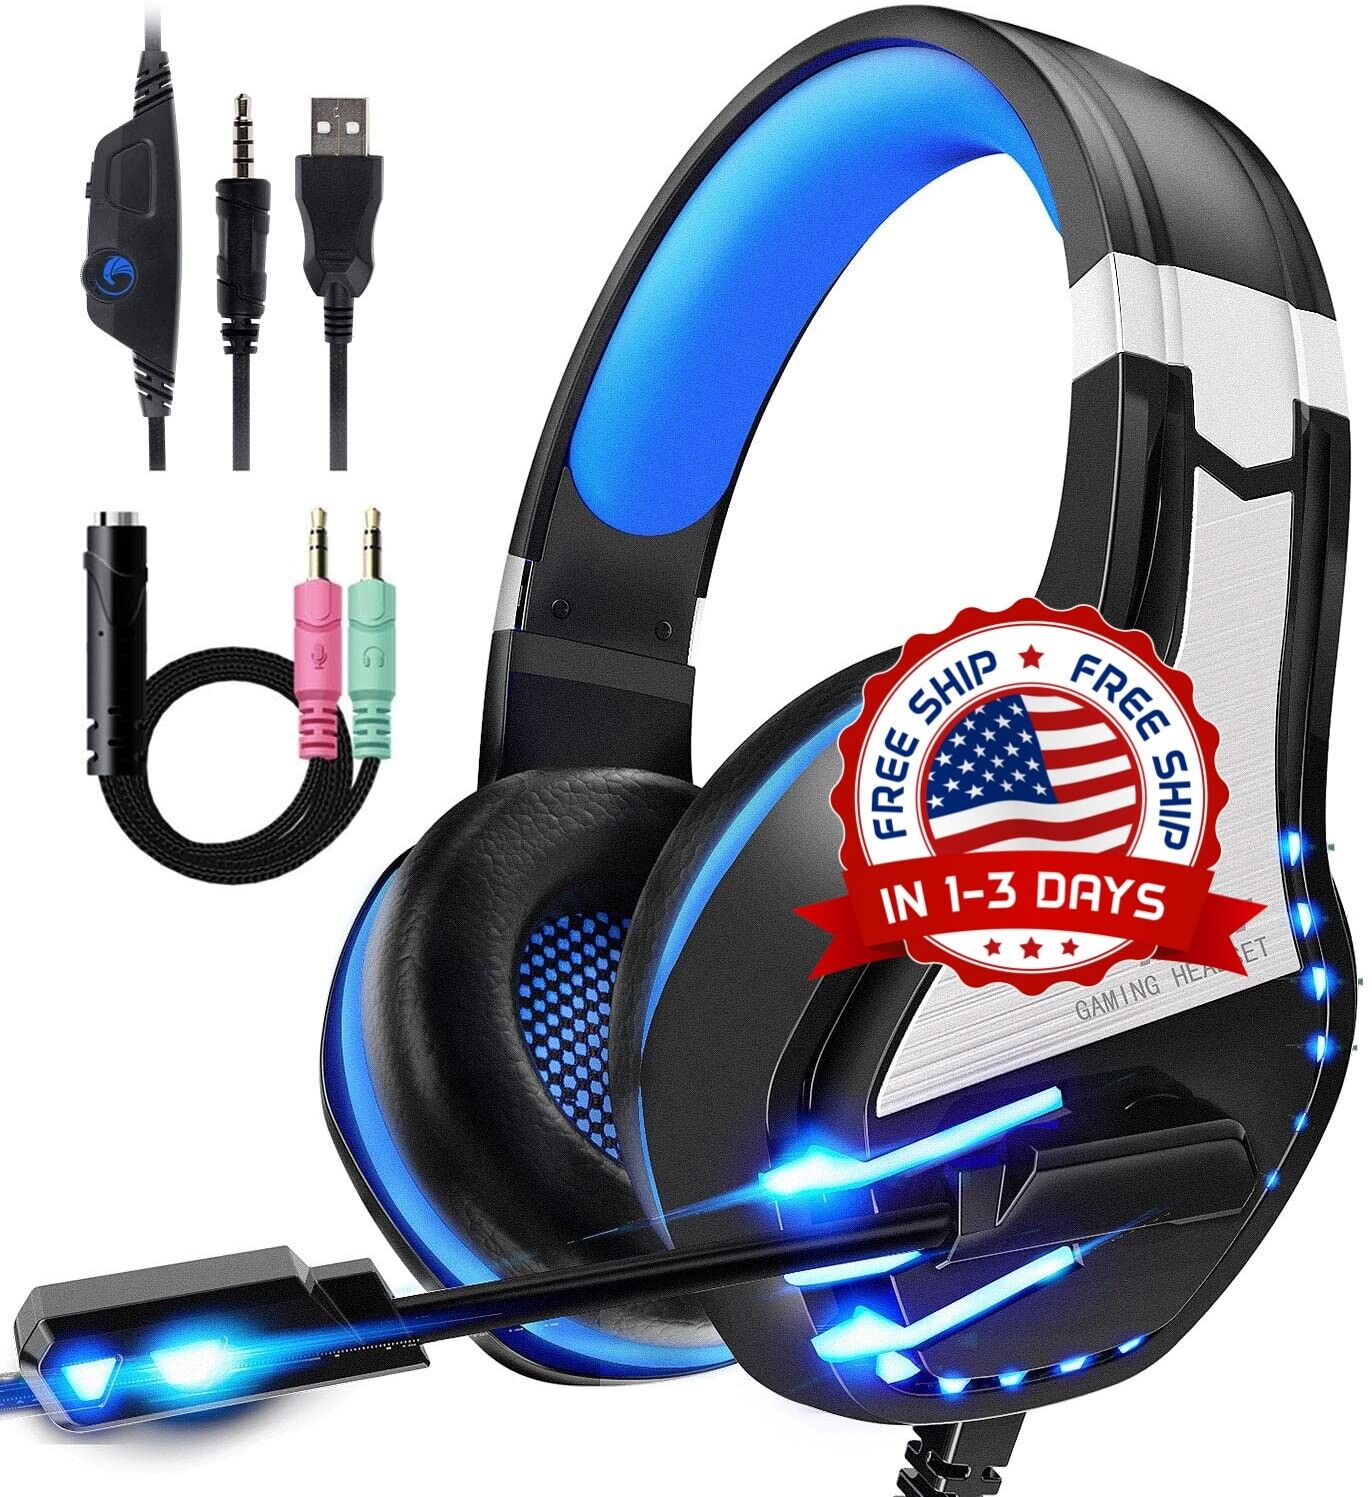 Cascos Gamer Auriculares Audifonos Gaming PS4 PC Xbox One 360 Microfono NUEVO